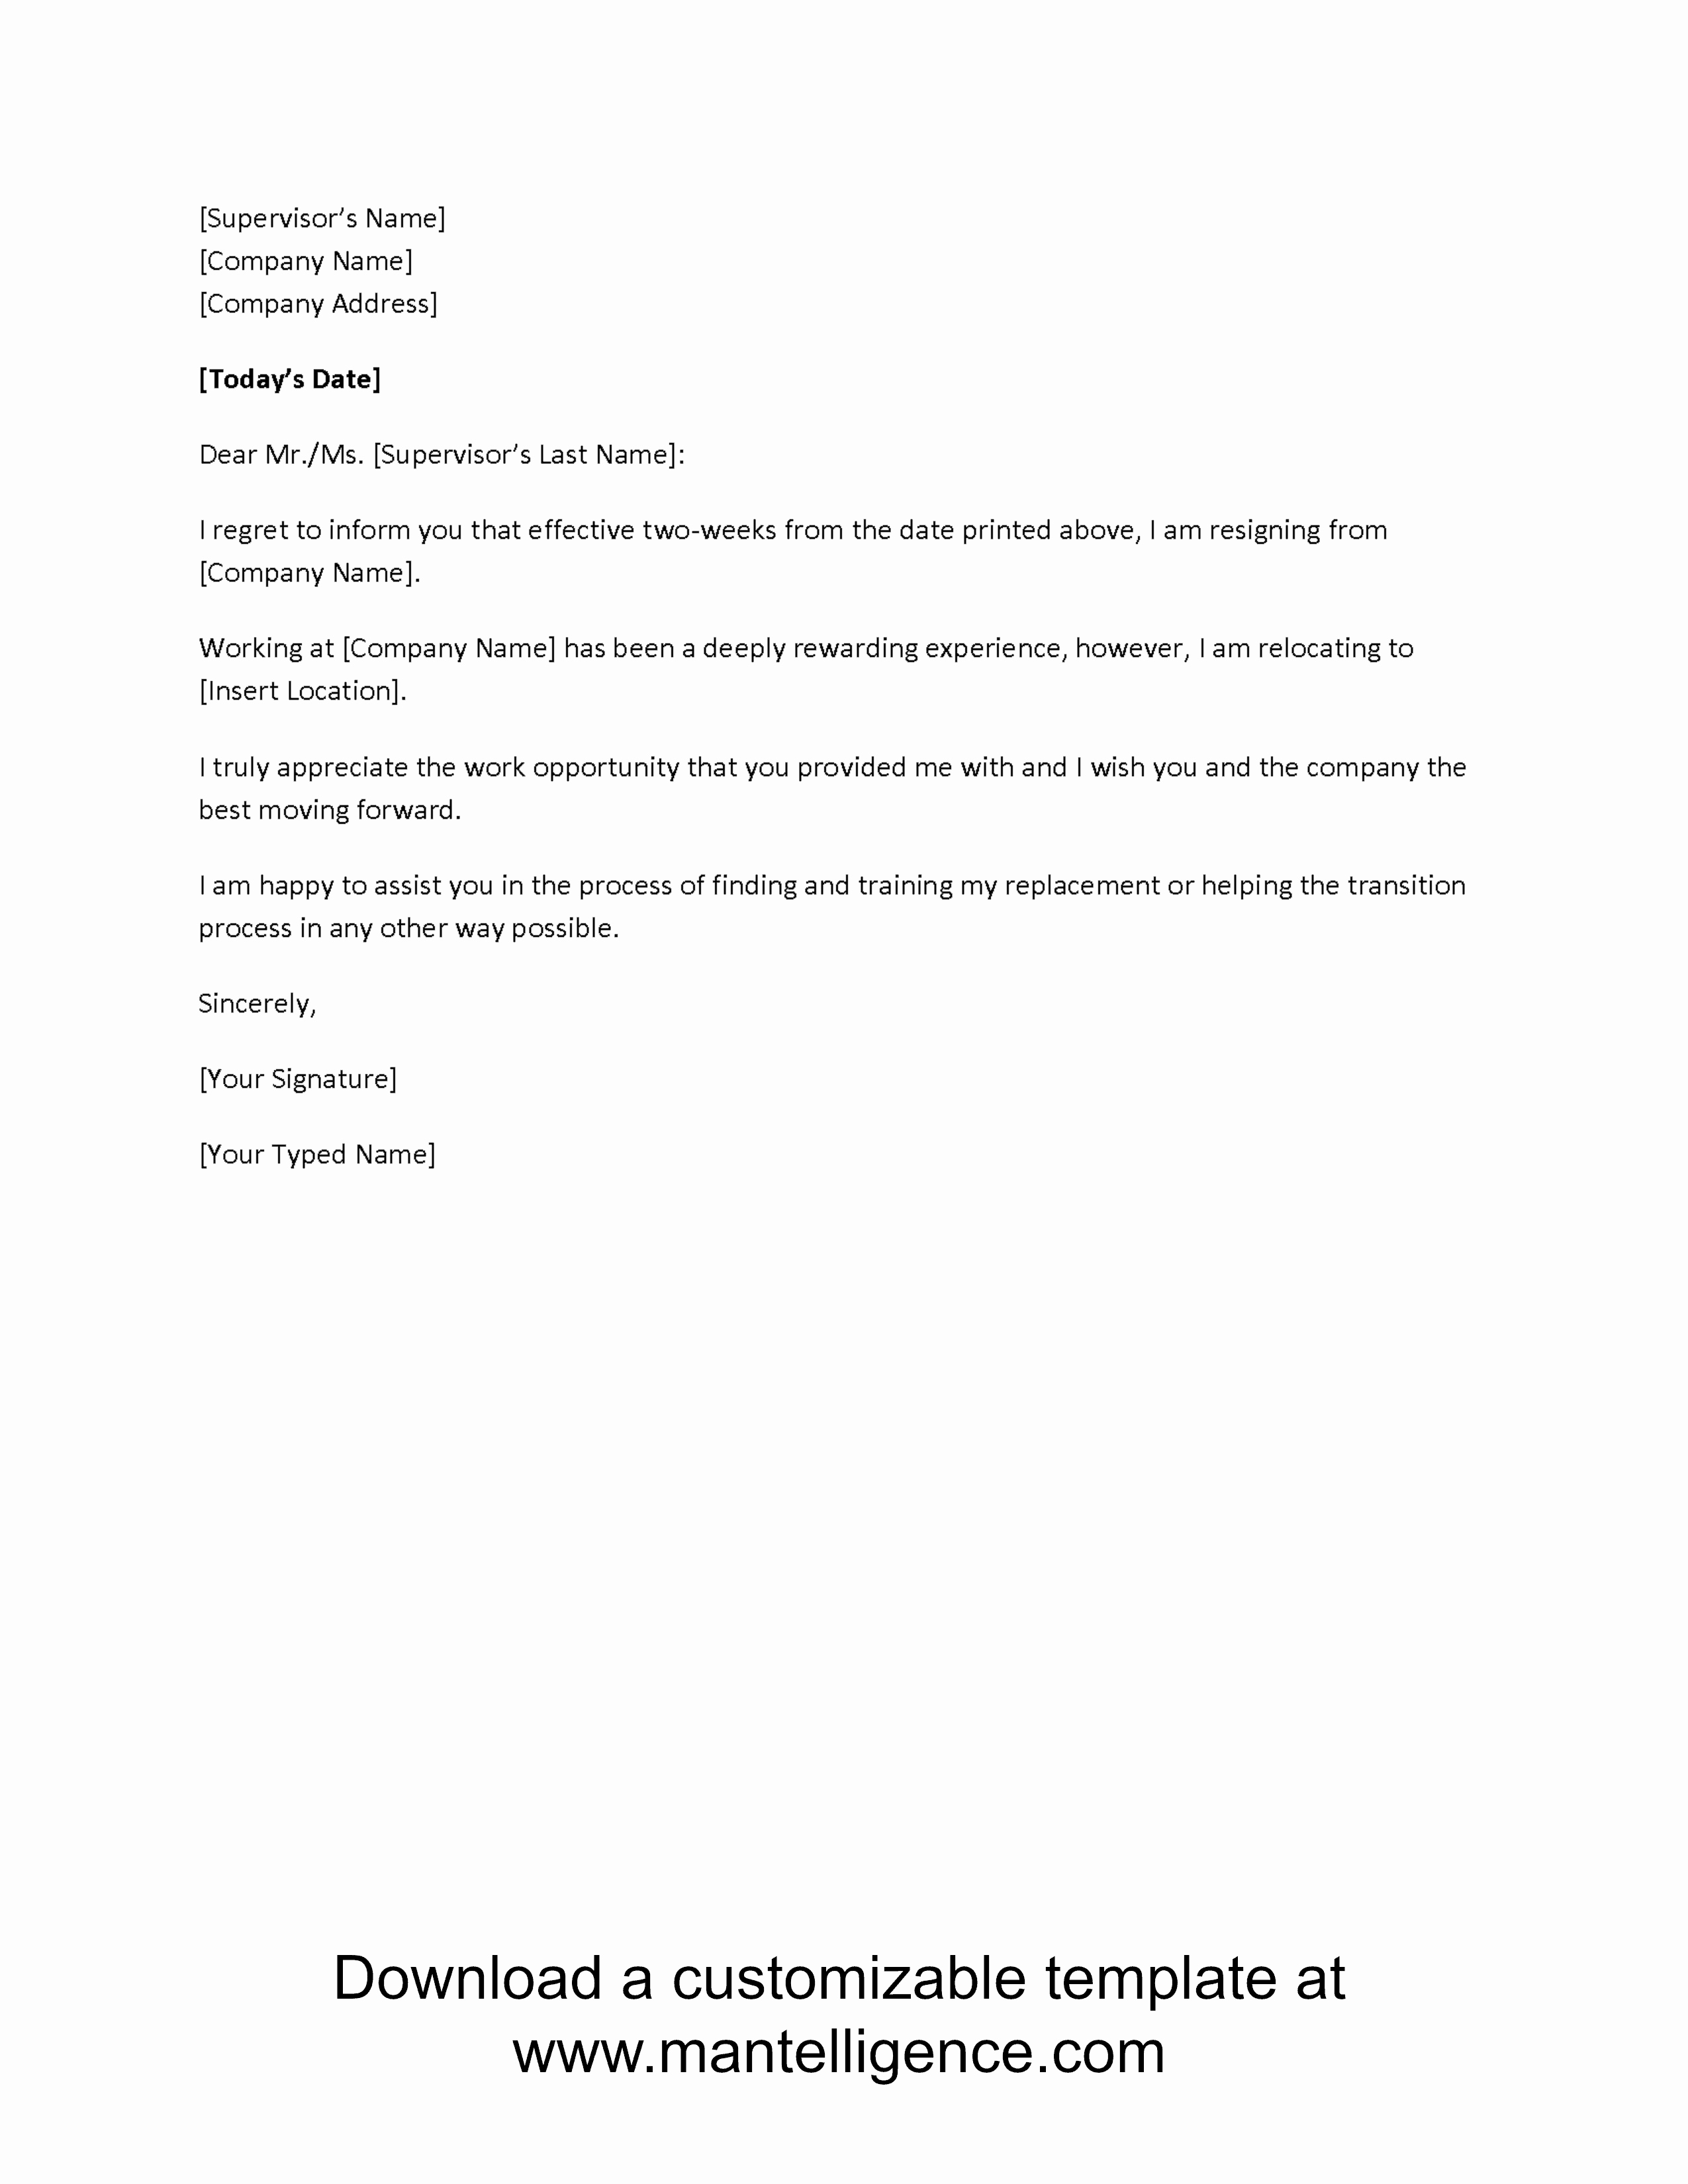 3 Highly Professional Two Weeks Notice Letter Templates